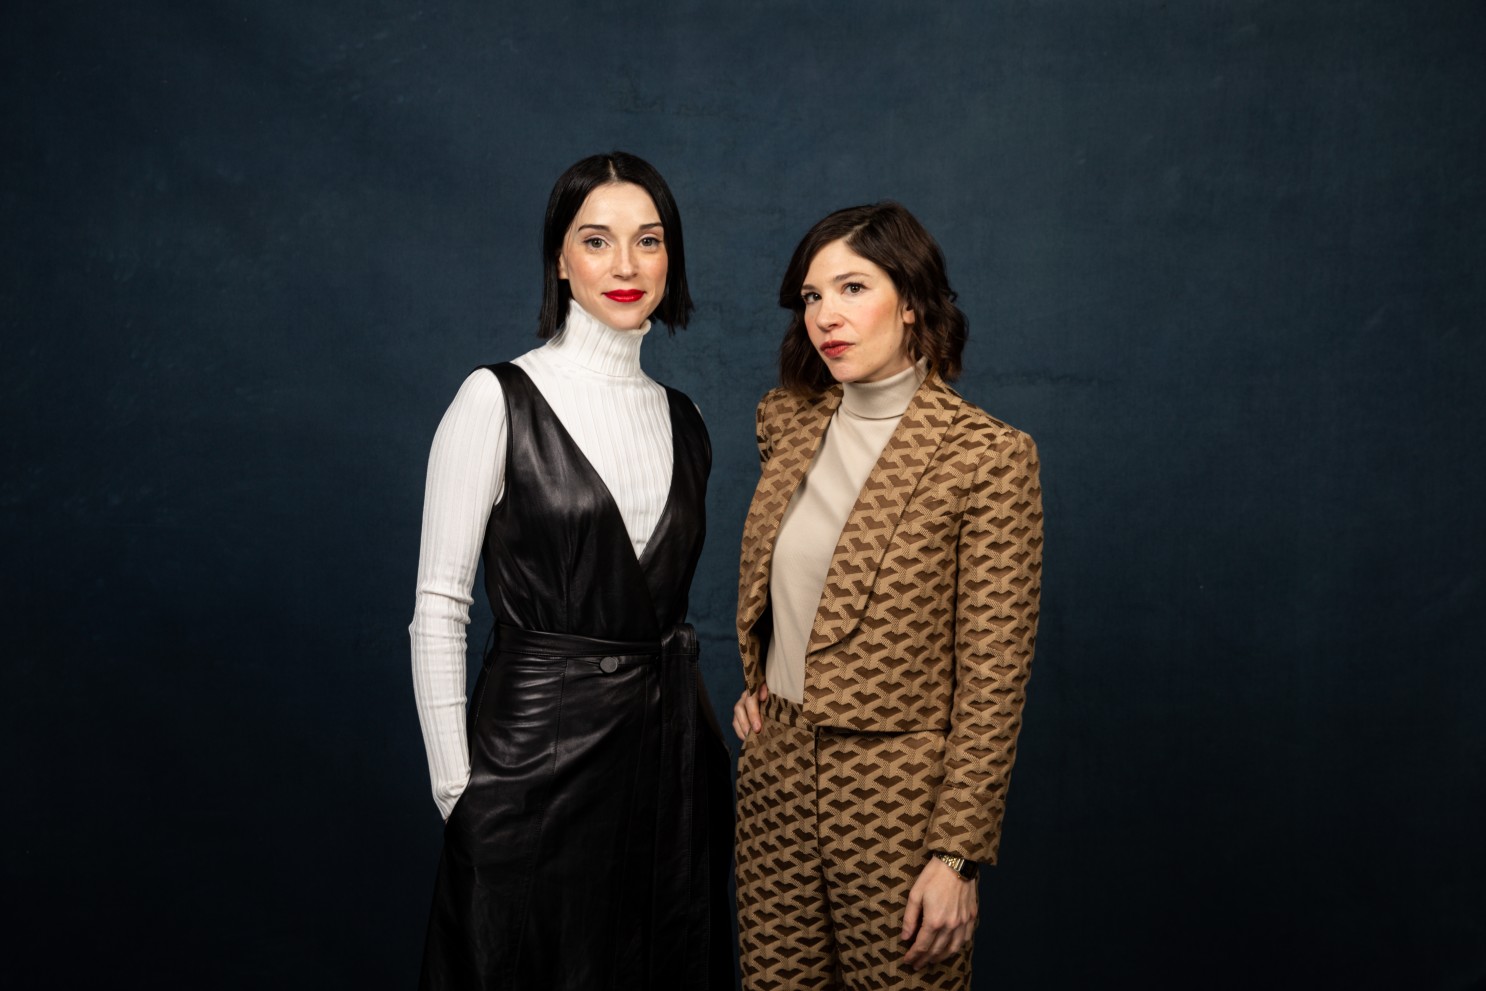 St. Vincent And Carrie Brownstein Reveal Trailer For 'The Nowhere Inn